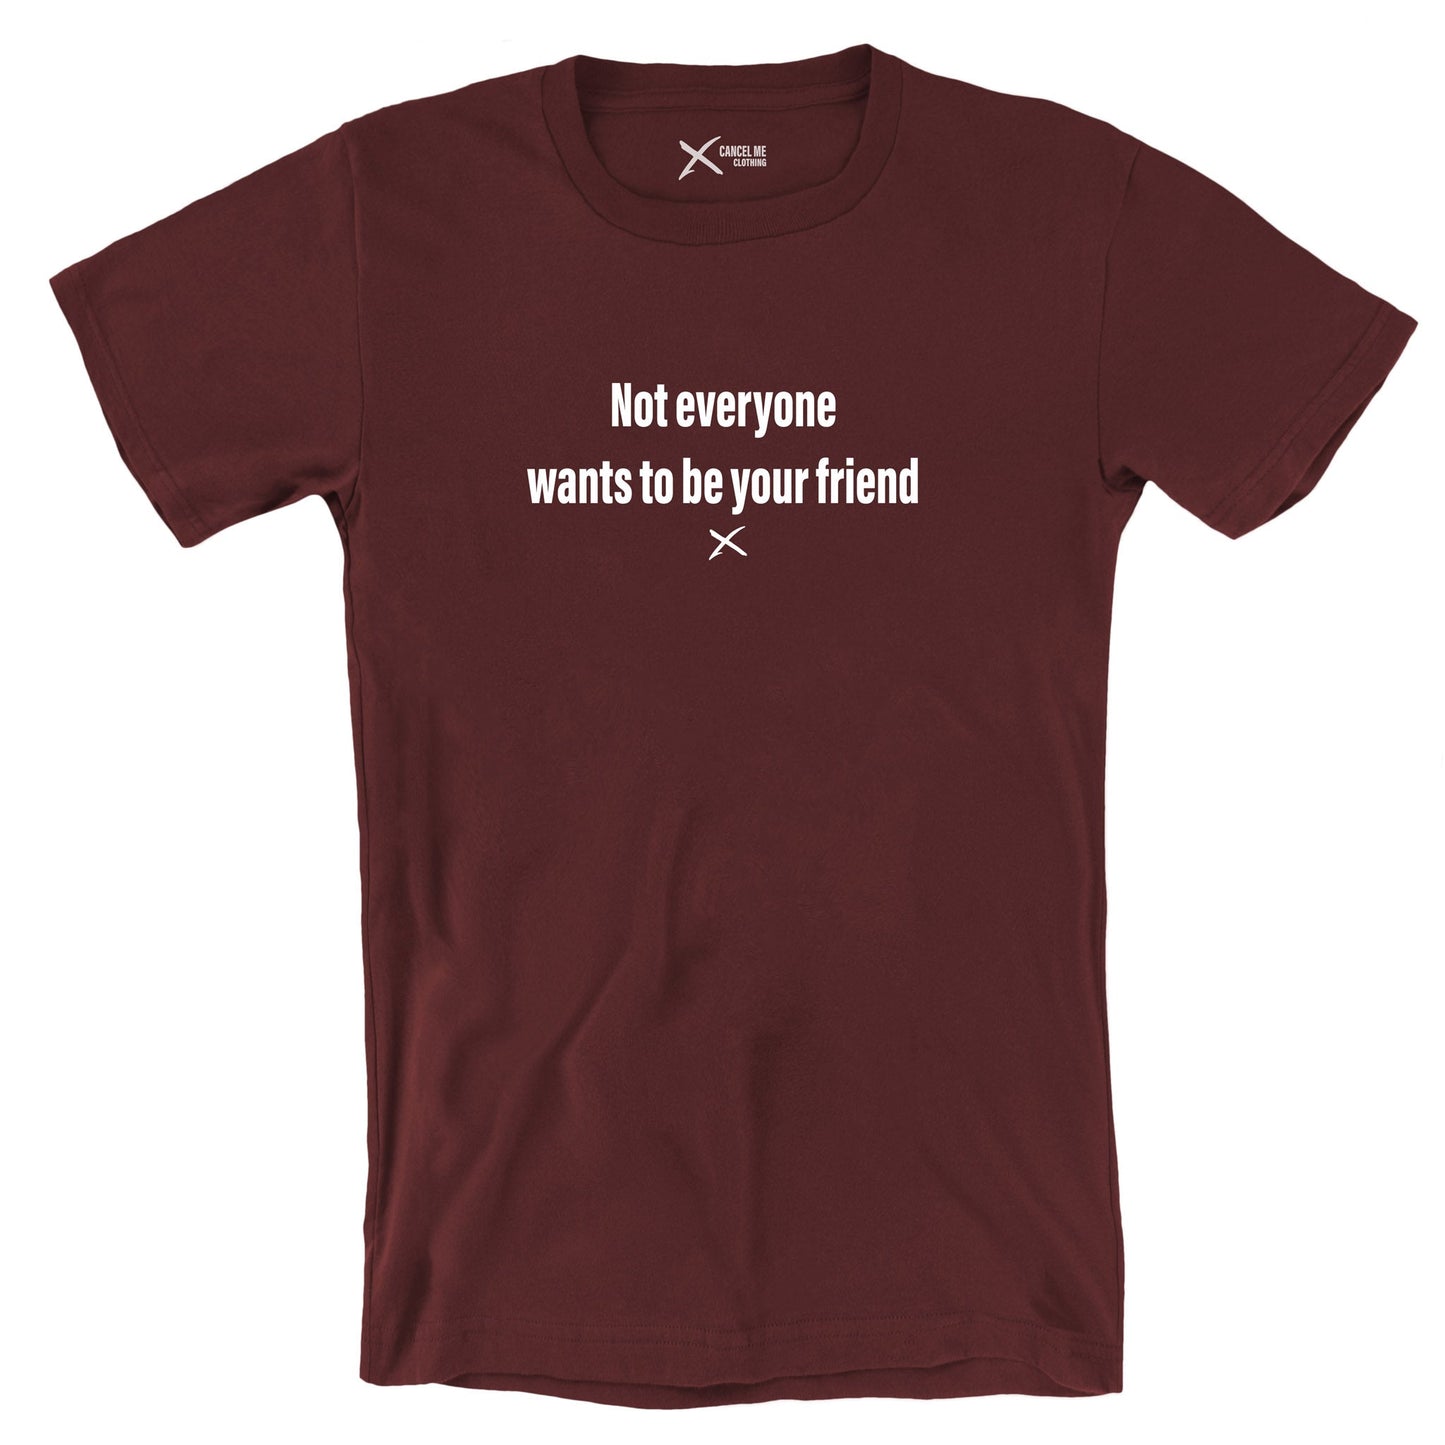 Not everyone wants to be your friend - Shirt